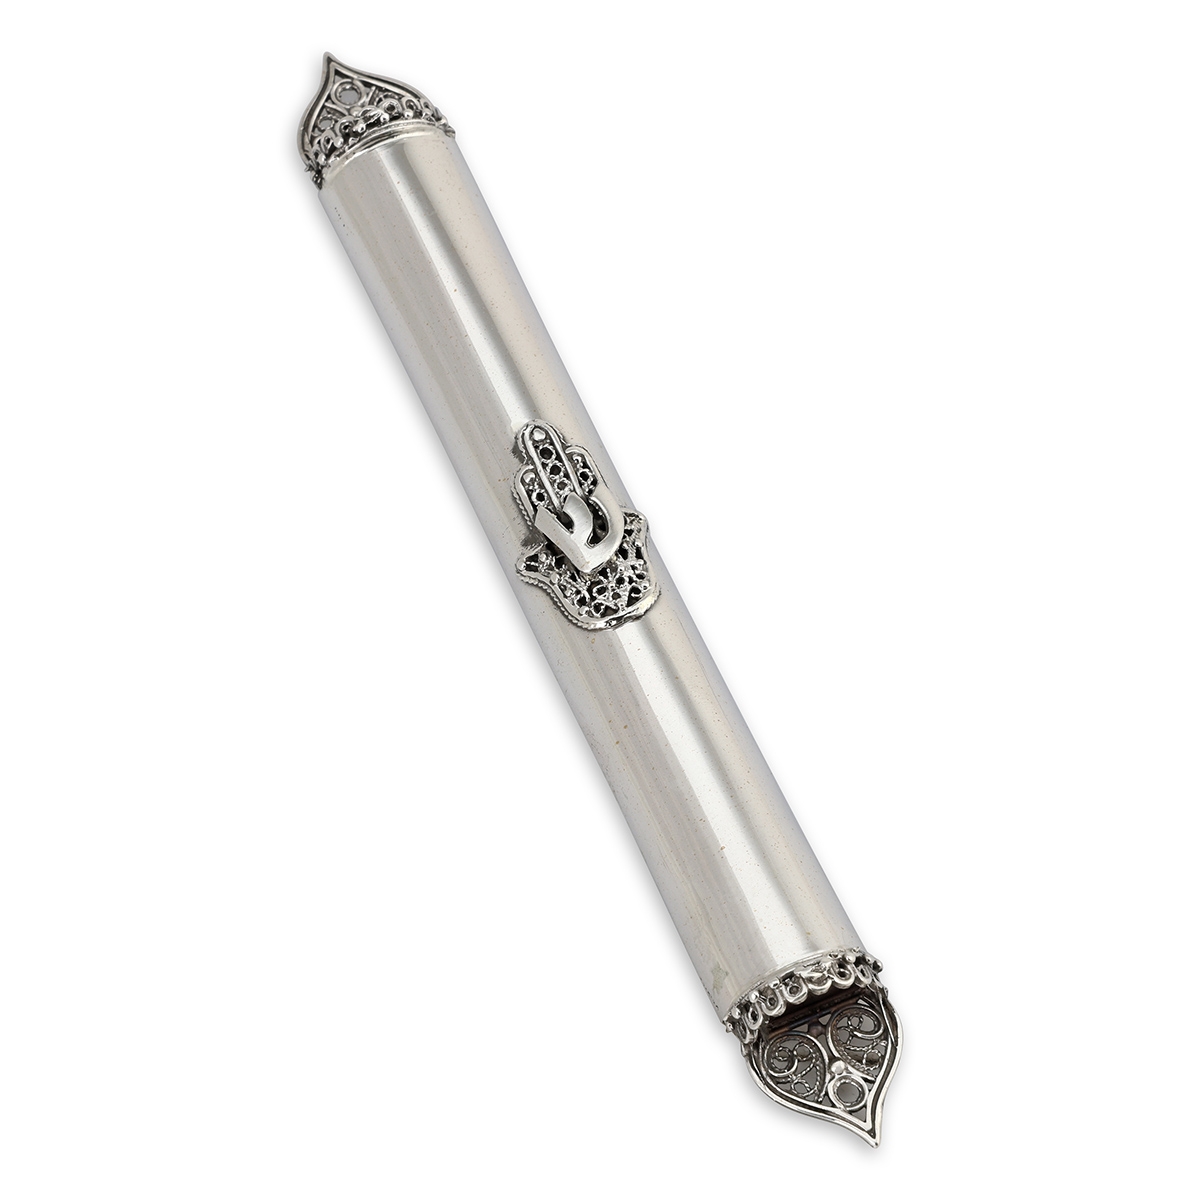 Polished Handcrafted Sterling Silver Mezuza Case With Hamsa Design By Traditional Yemenite Art - 1